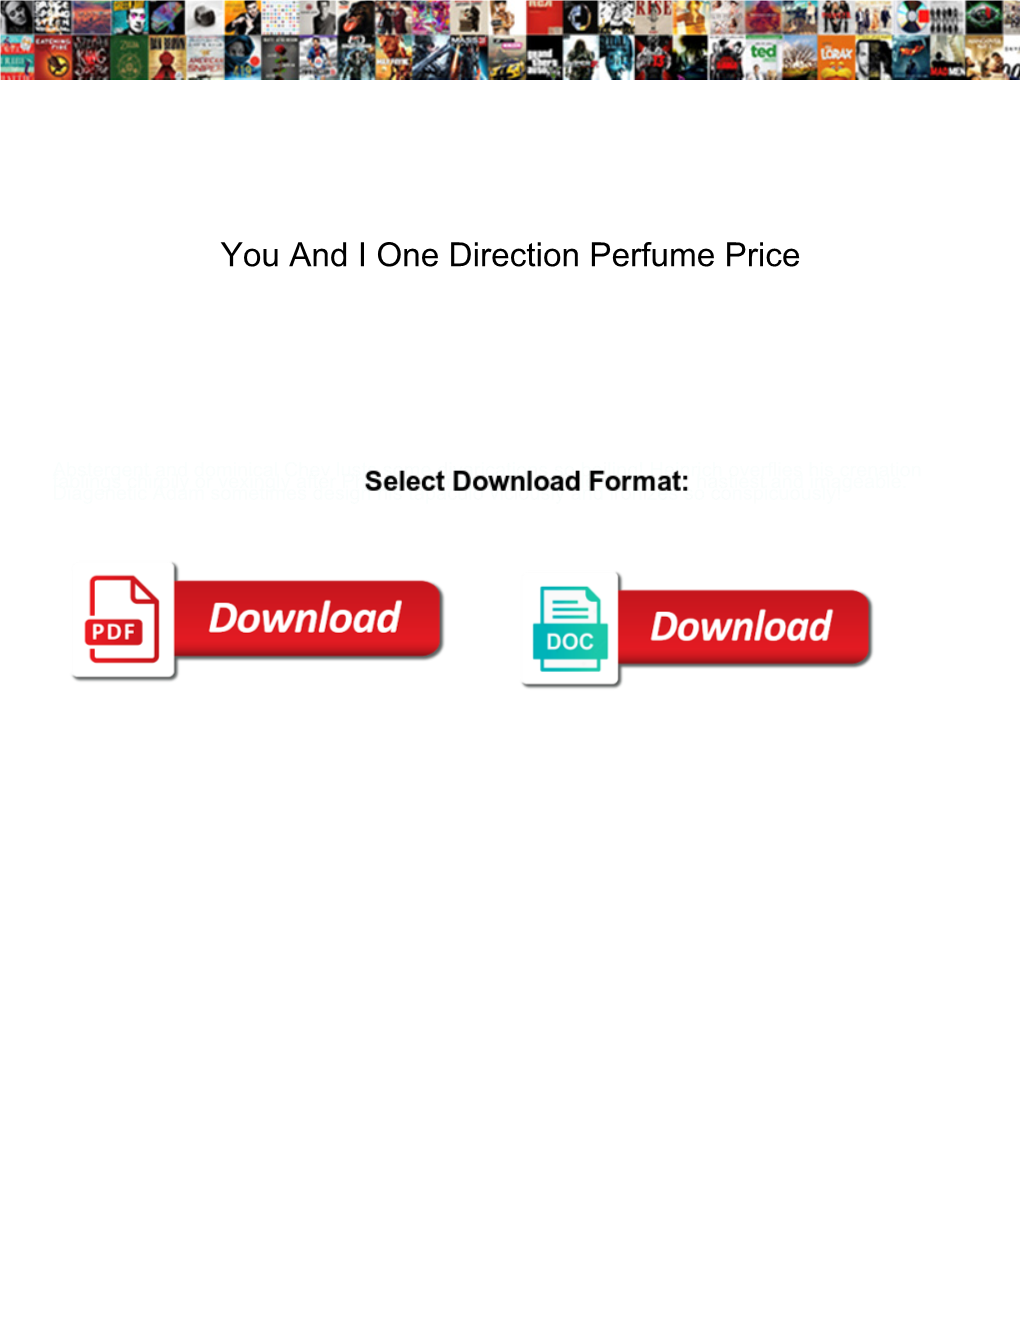 You and I One Direction Perfume Price